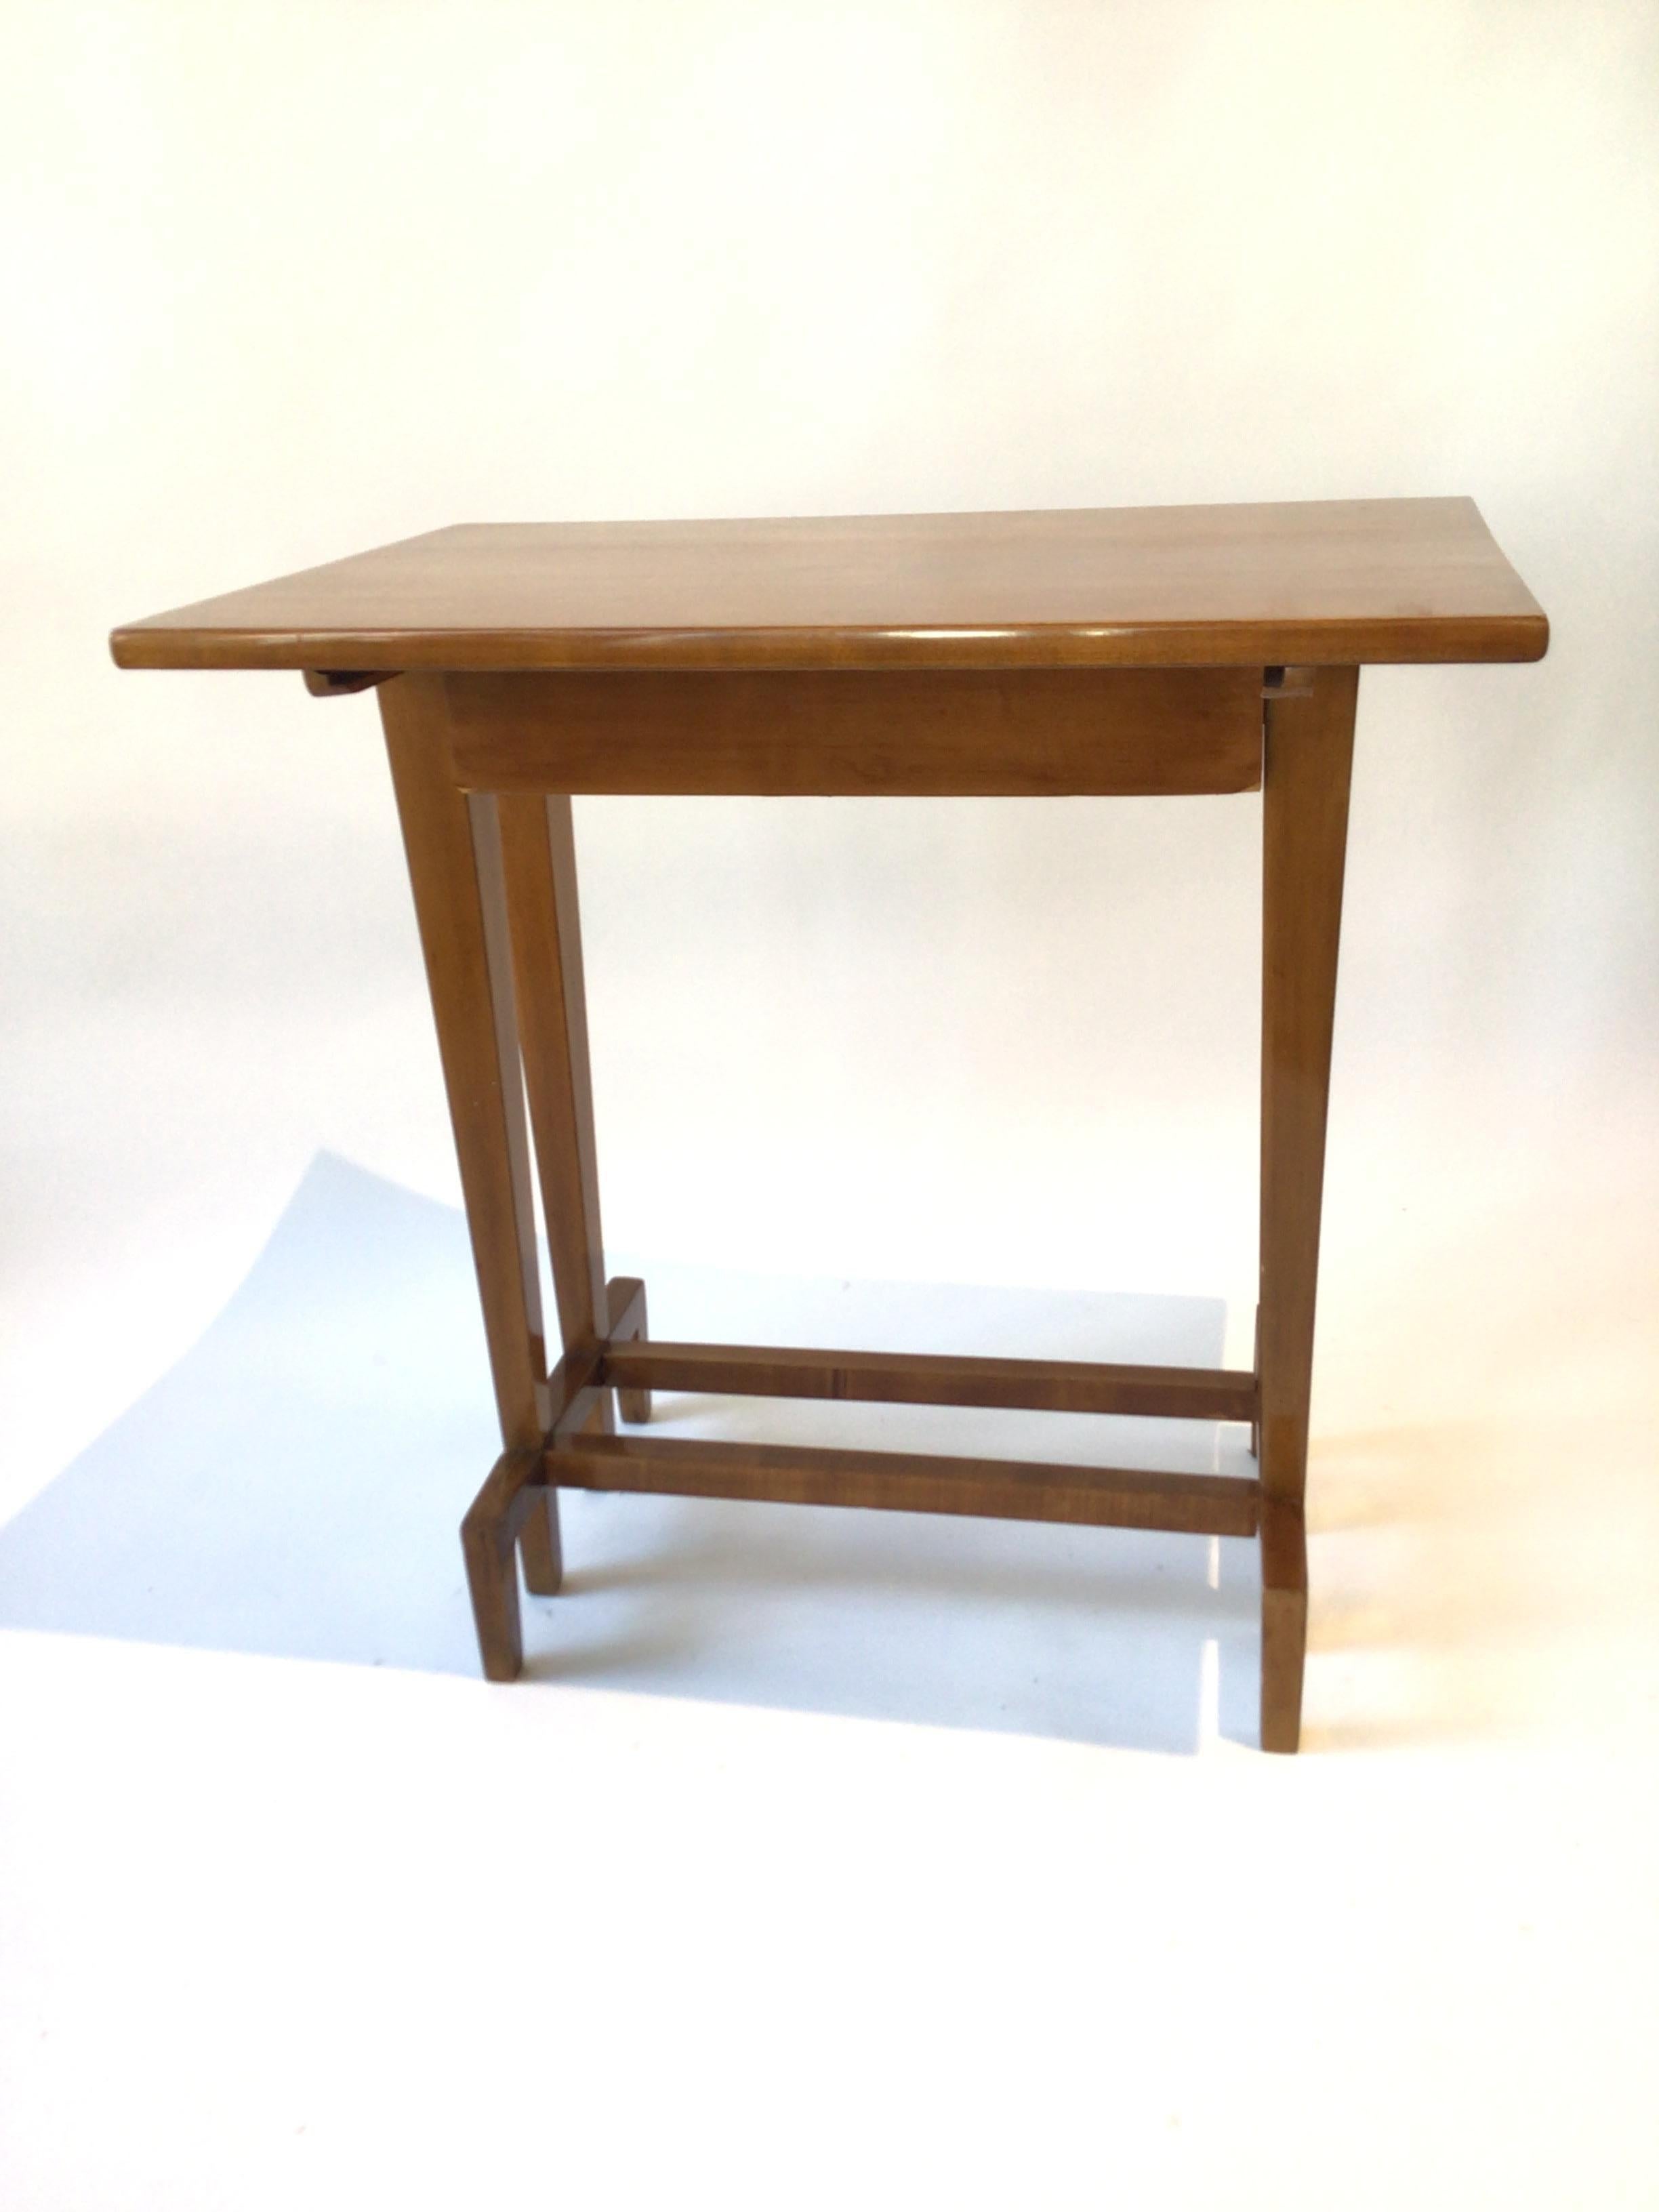 1920s Walnut architectural looking side table with drawer.